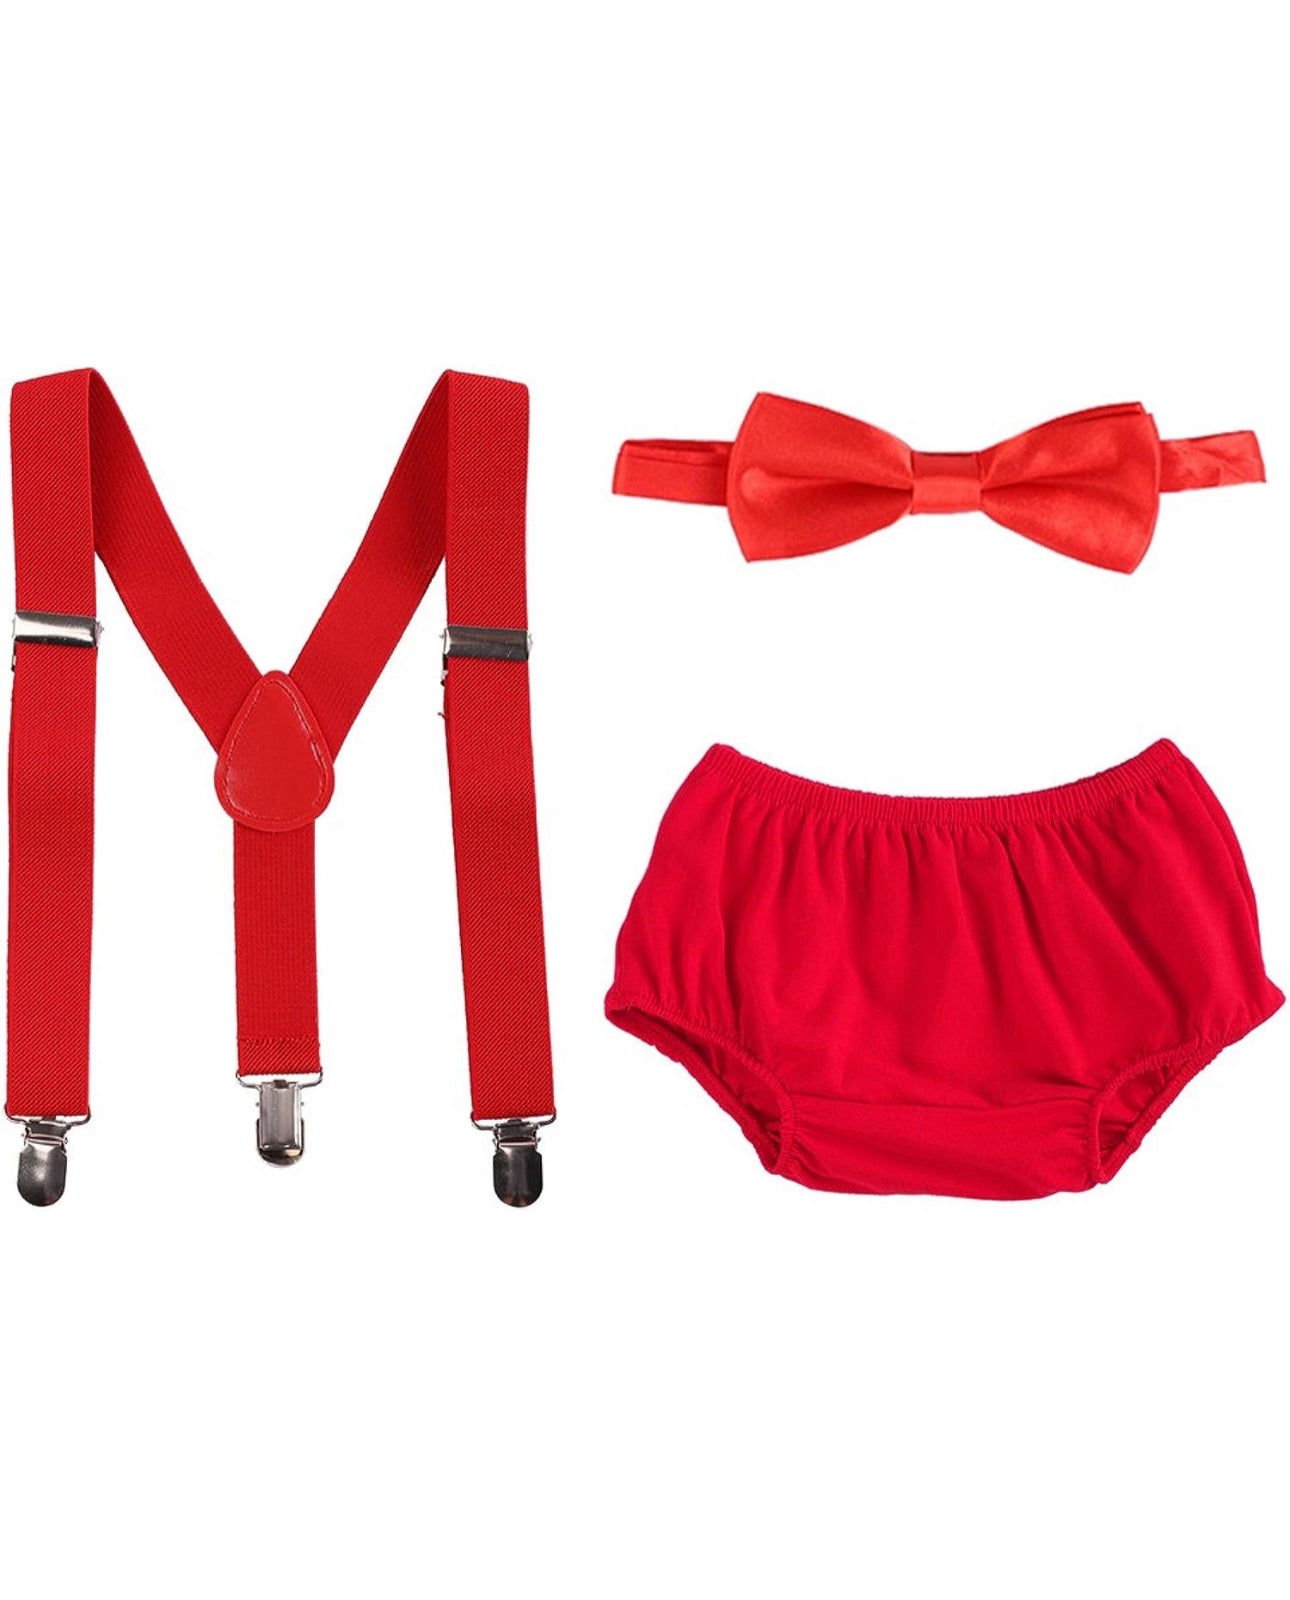 Baby Boy Smash Cake Bowtie Outfit